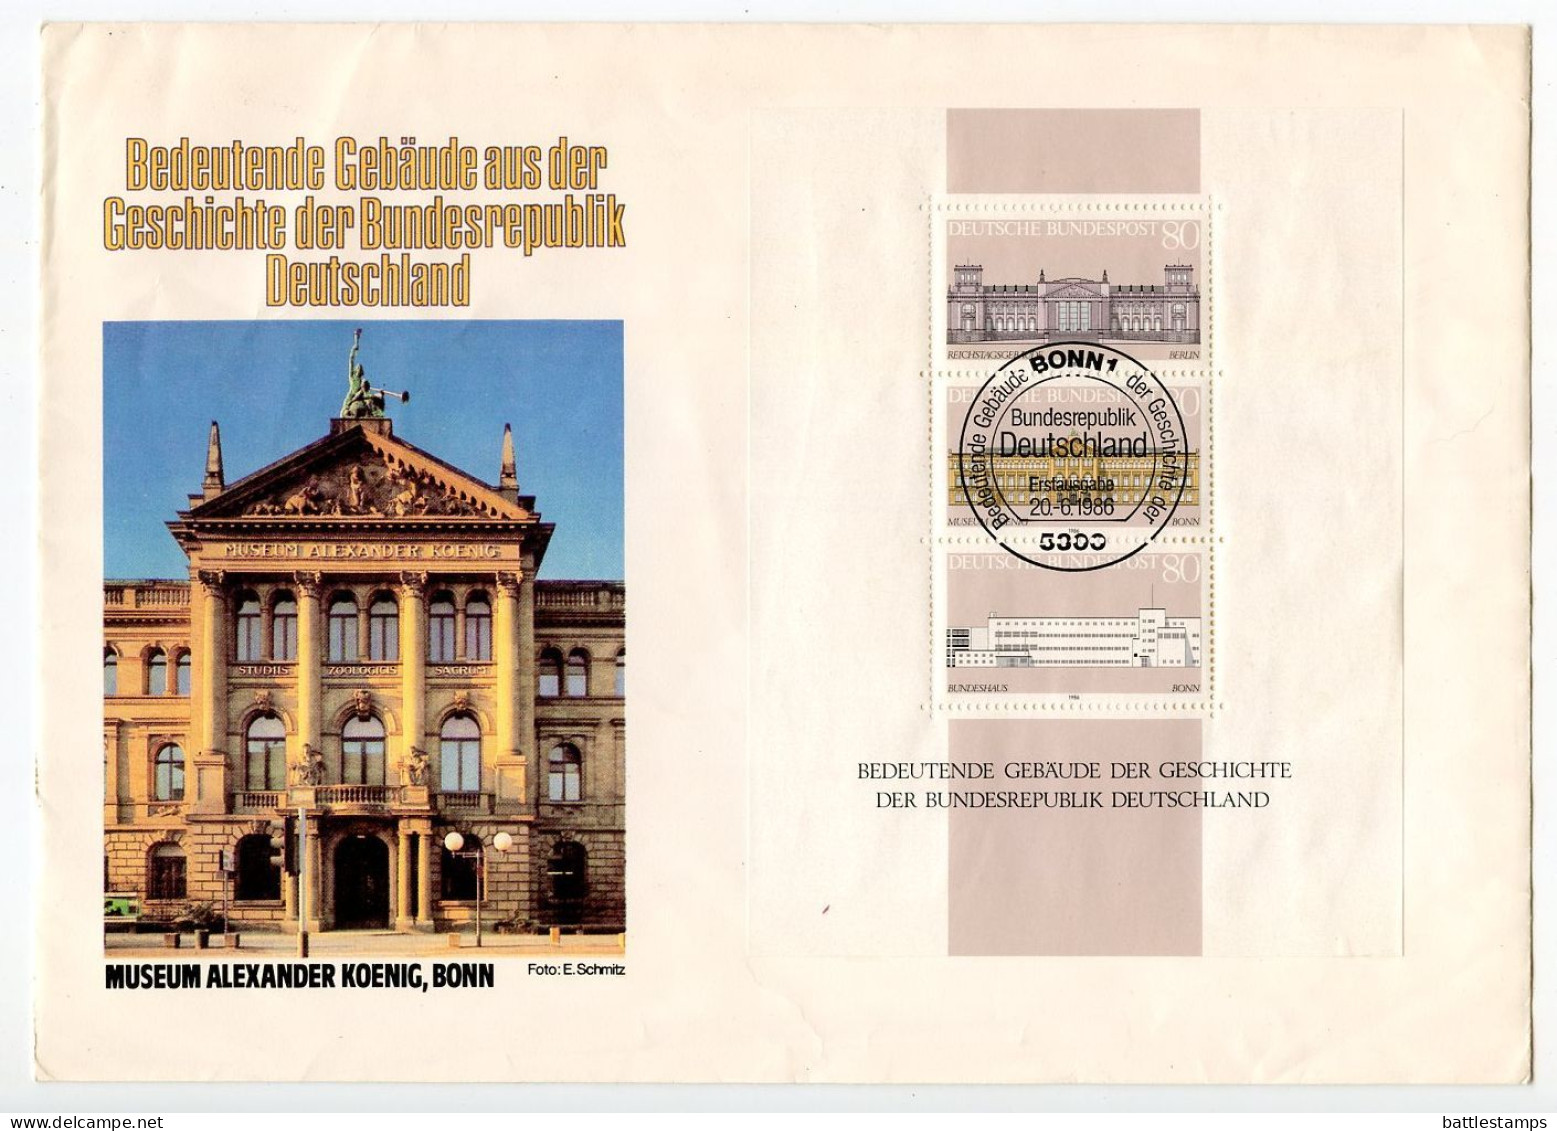 Germany, West 1986 FDC Scott 1466 S/S - Reichstag, Koening Museum & Parliament - 1981-1990